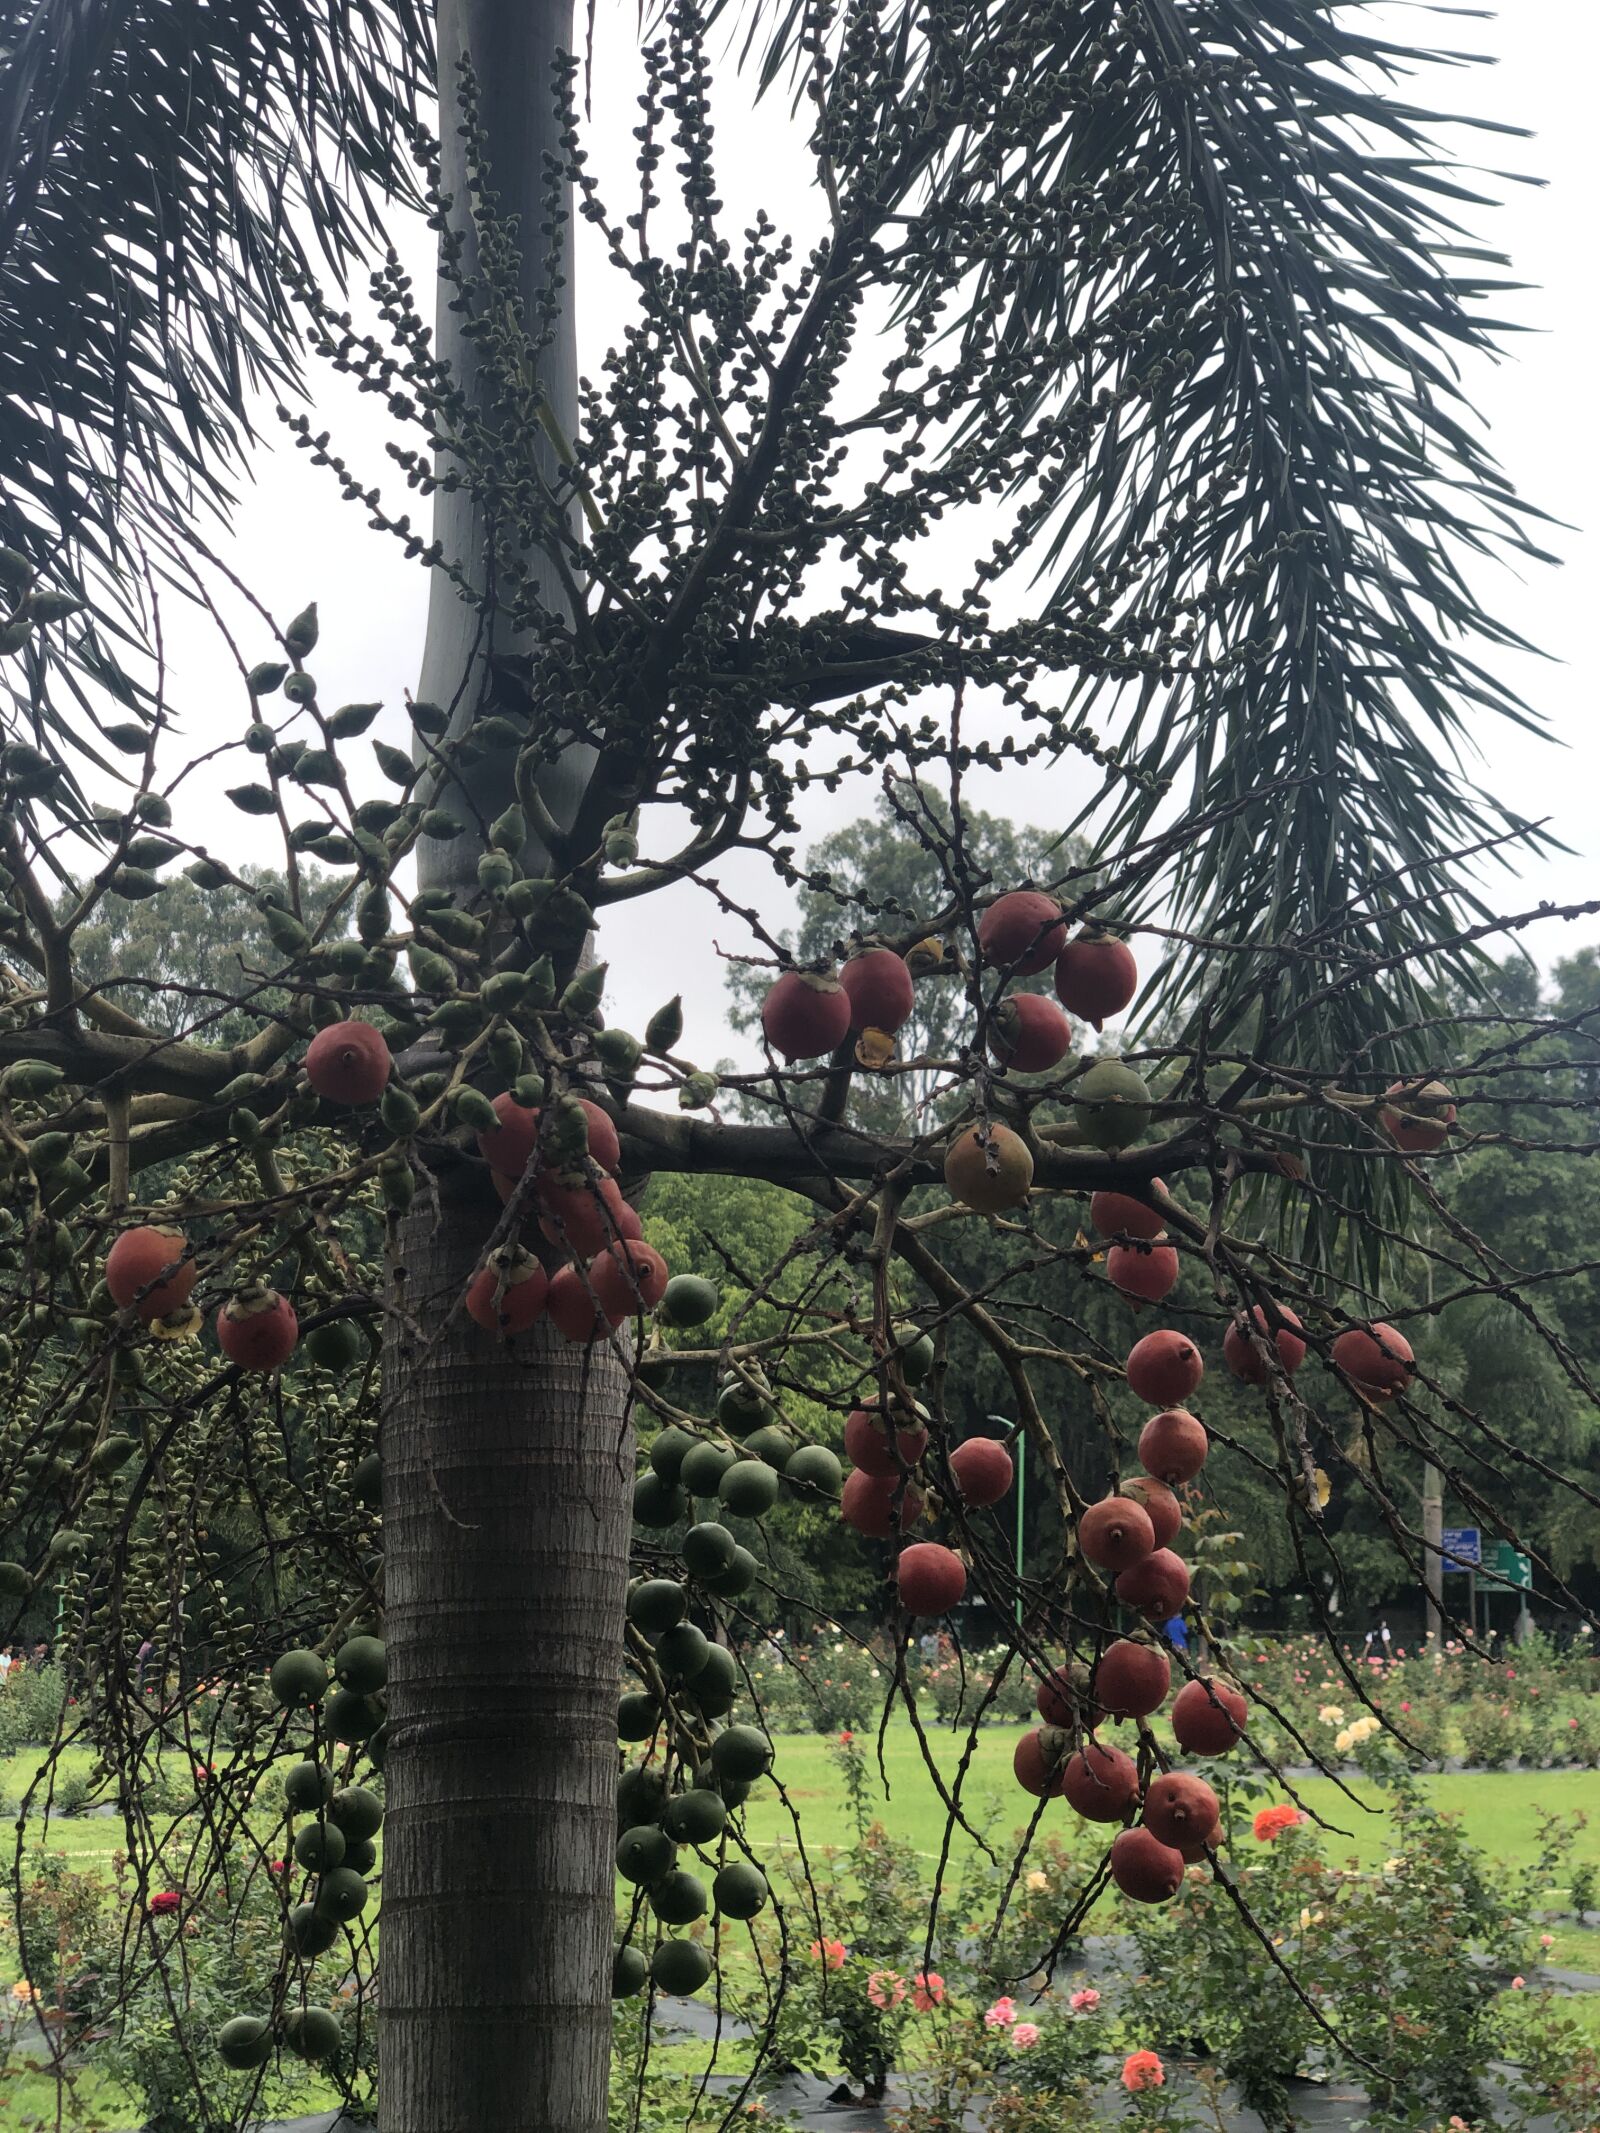 iPhone X back dual camera 6mm f/2.4 sample photo. Tree, fruit, branch photography